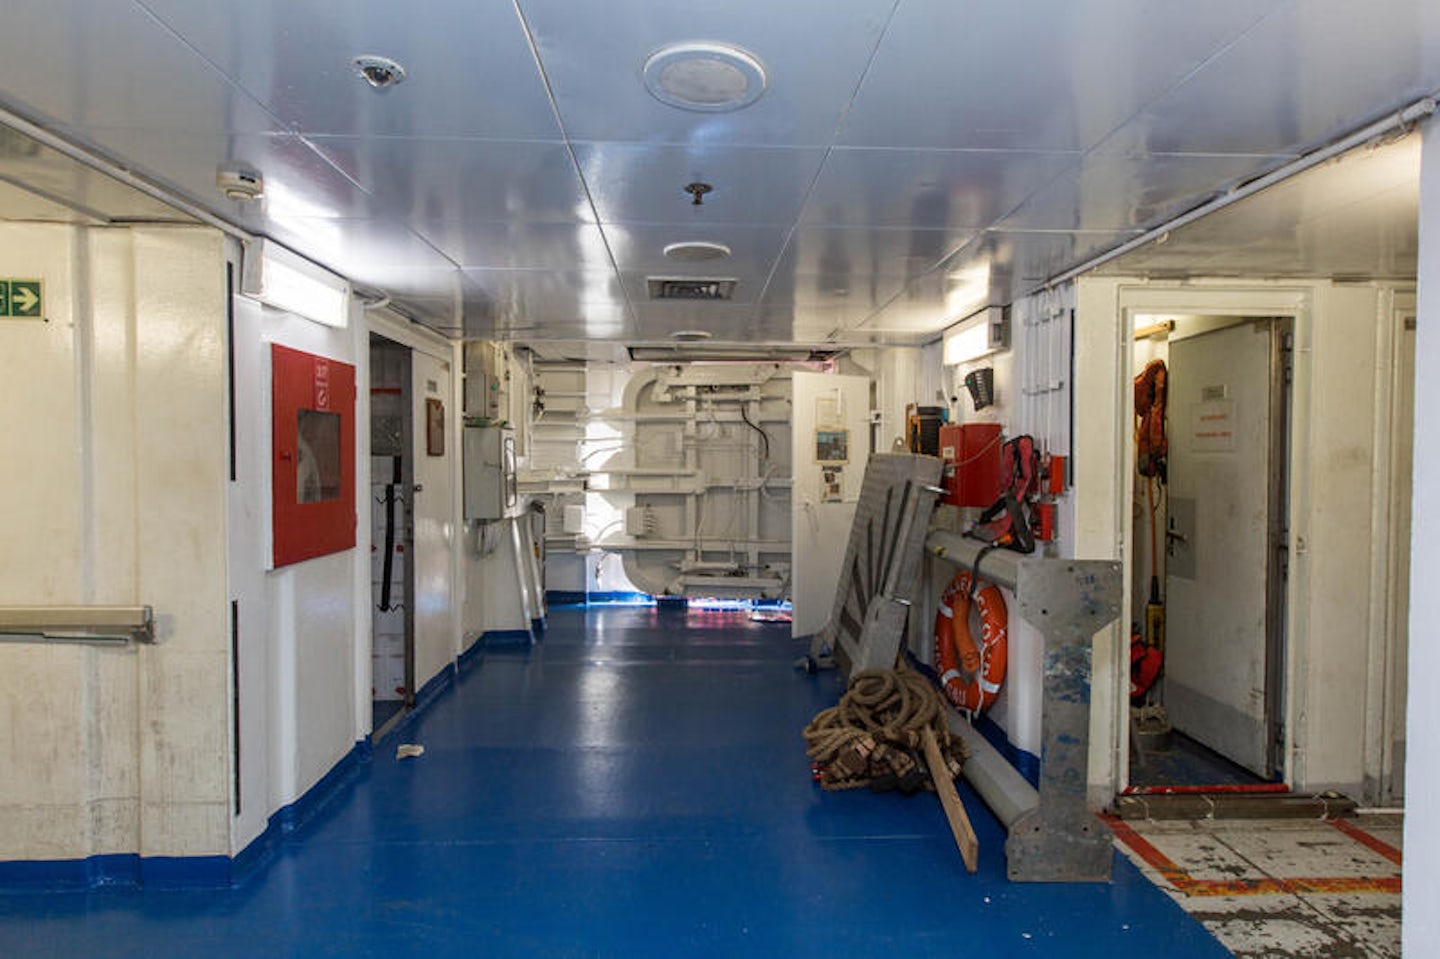 Hallways on Silver Cloud Expedition